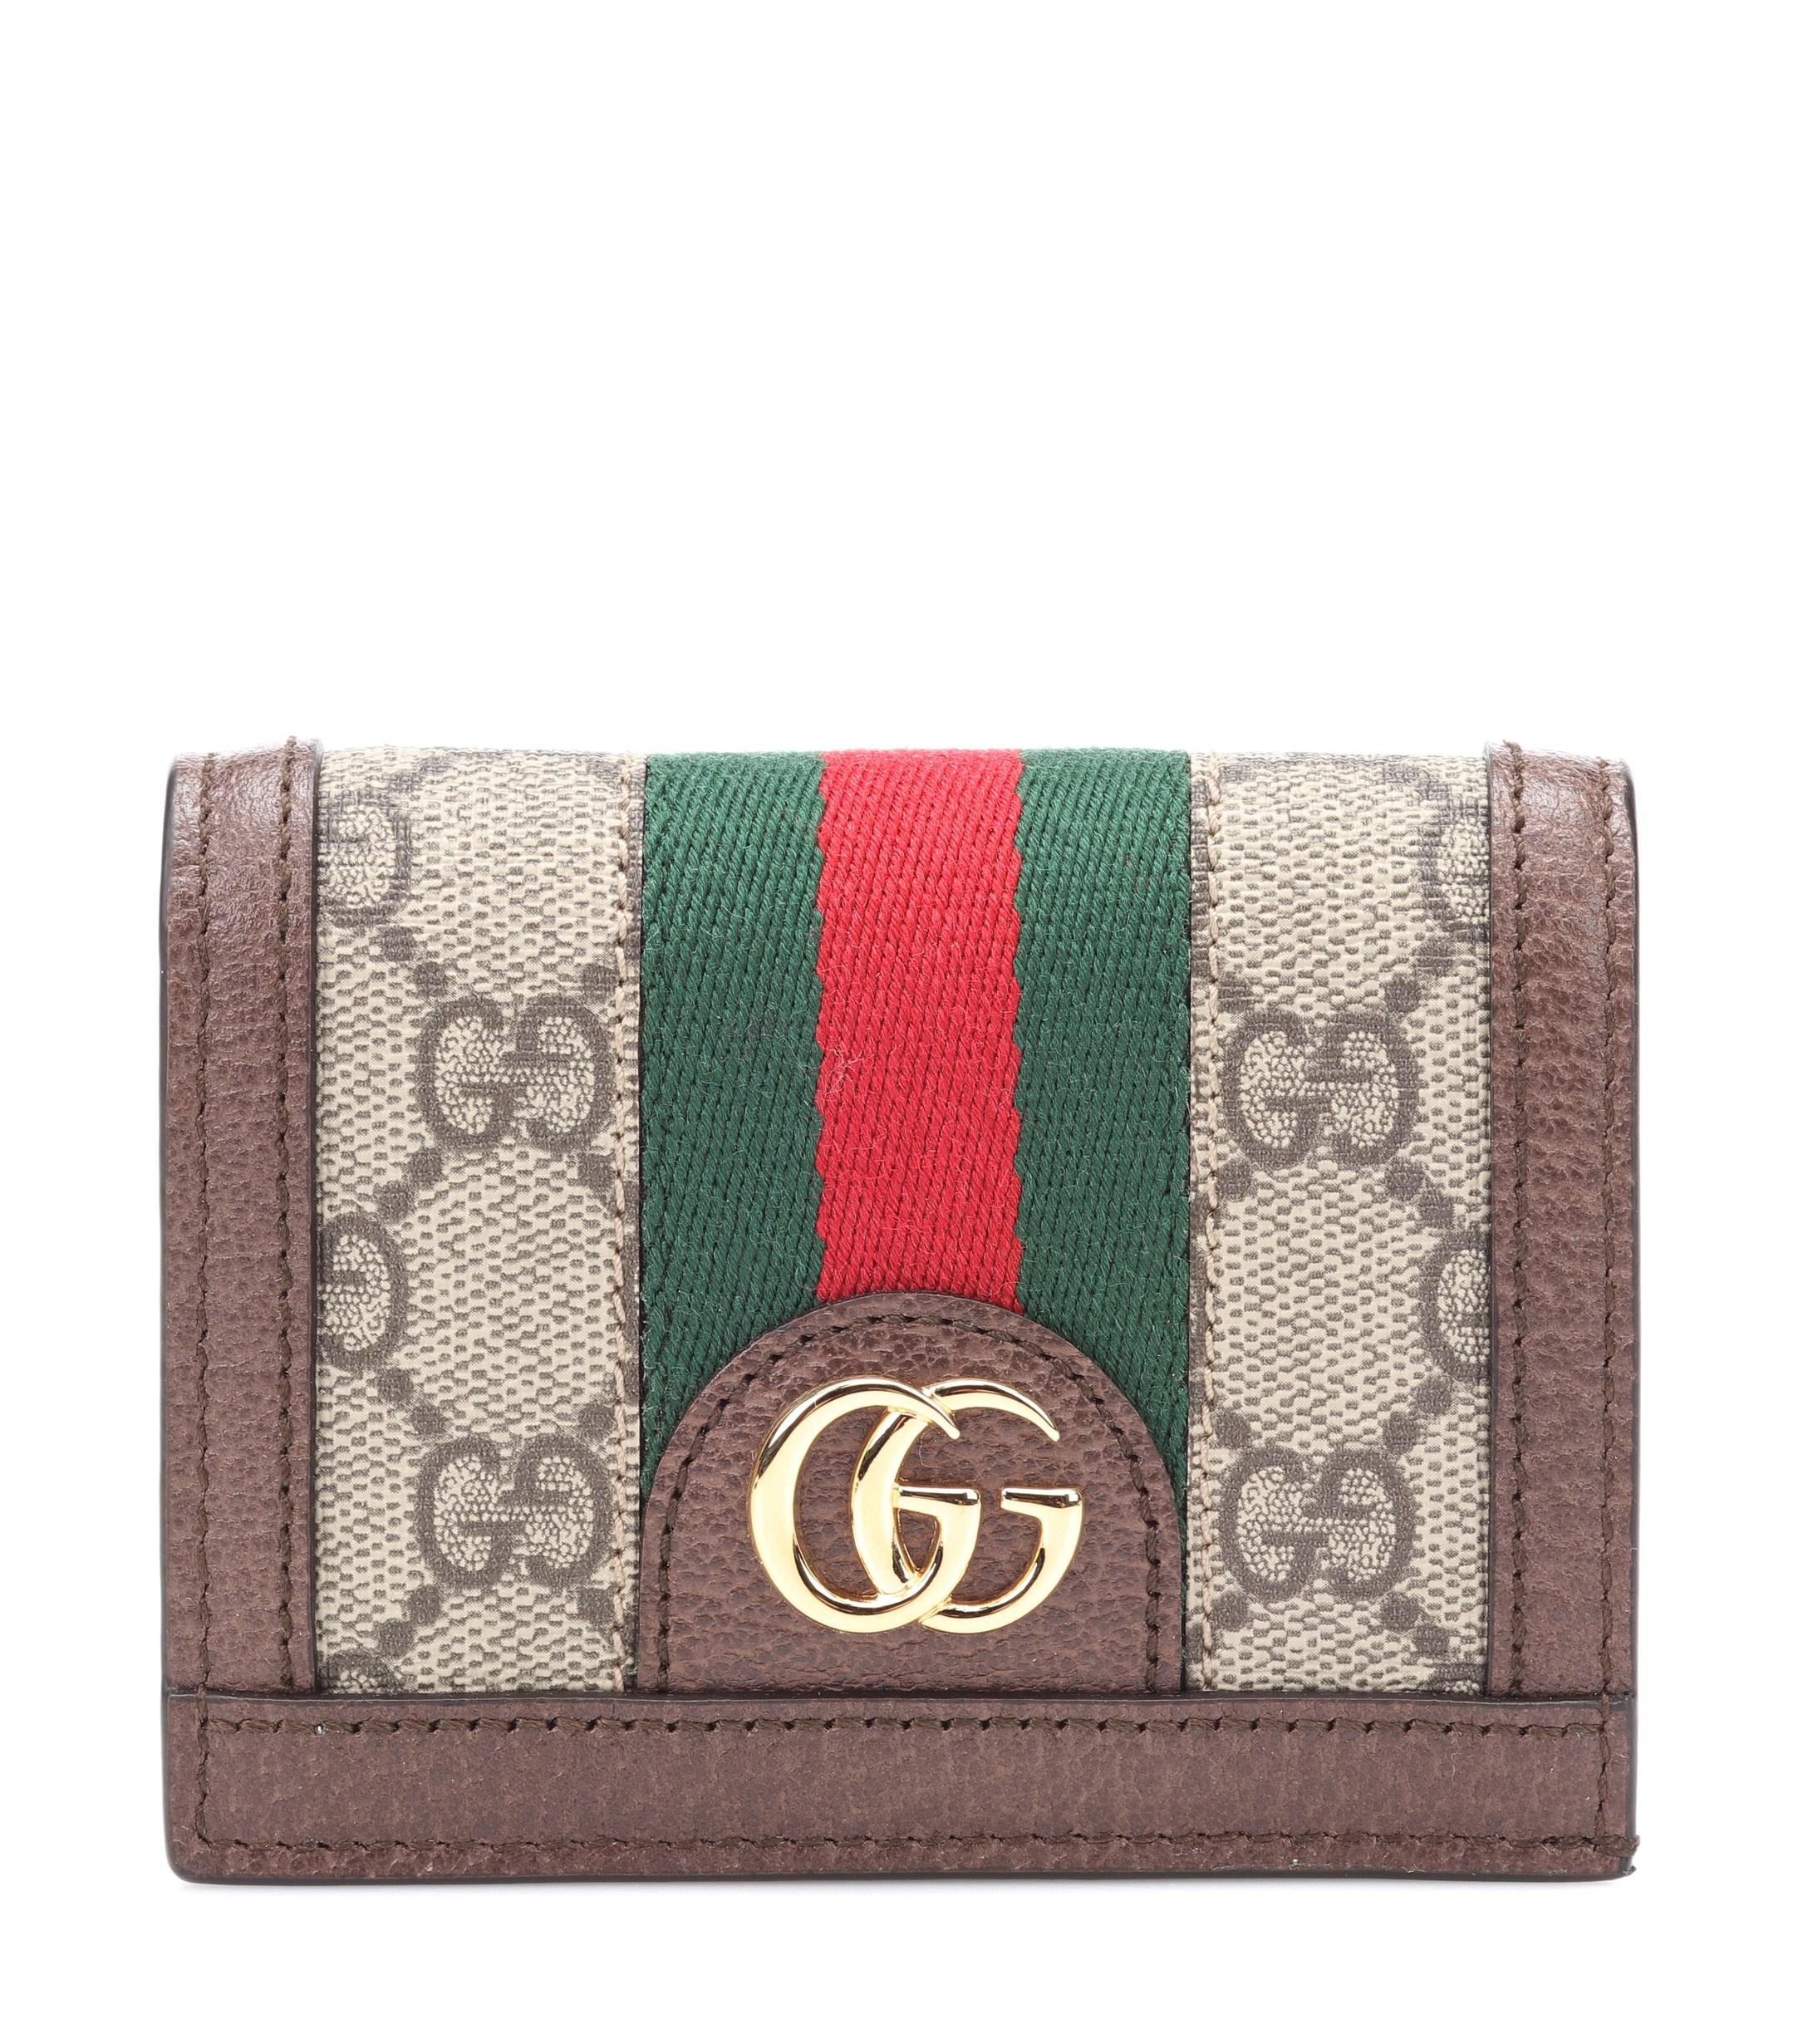 Gucci Ophidia GG Leather Wallet in Brown - Save 24% - Lyst